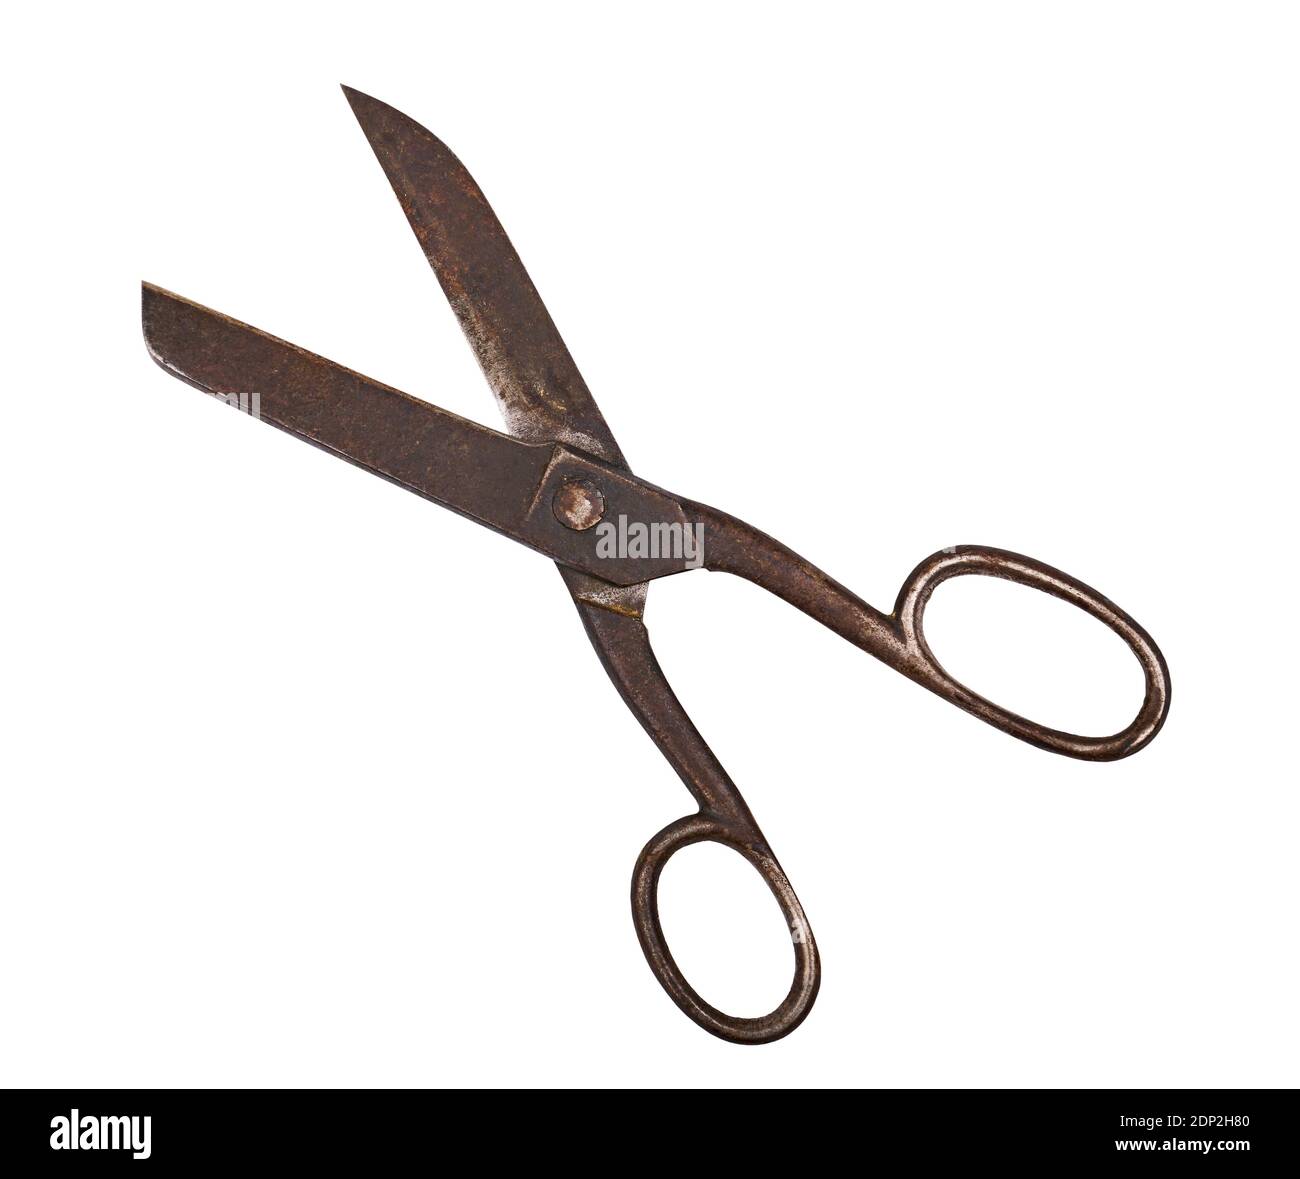 Antique Dirty Rusty Metal Cutting Shears Stock Photo - Download Image Now -  Antique, Construction Equipment, Construction Industry - iStock